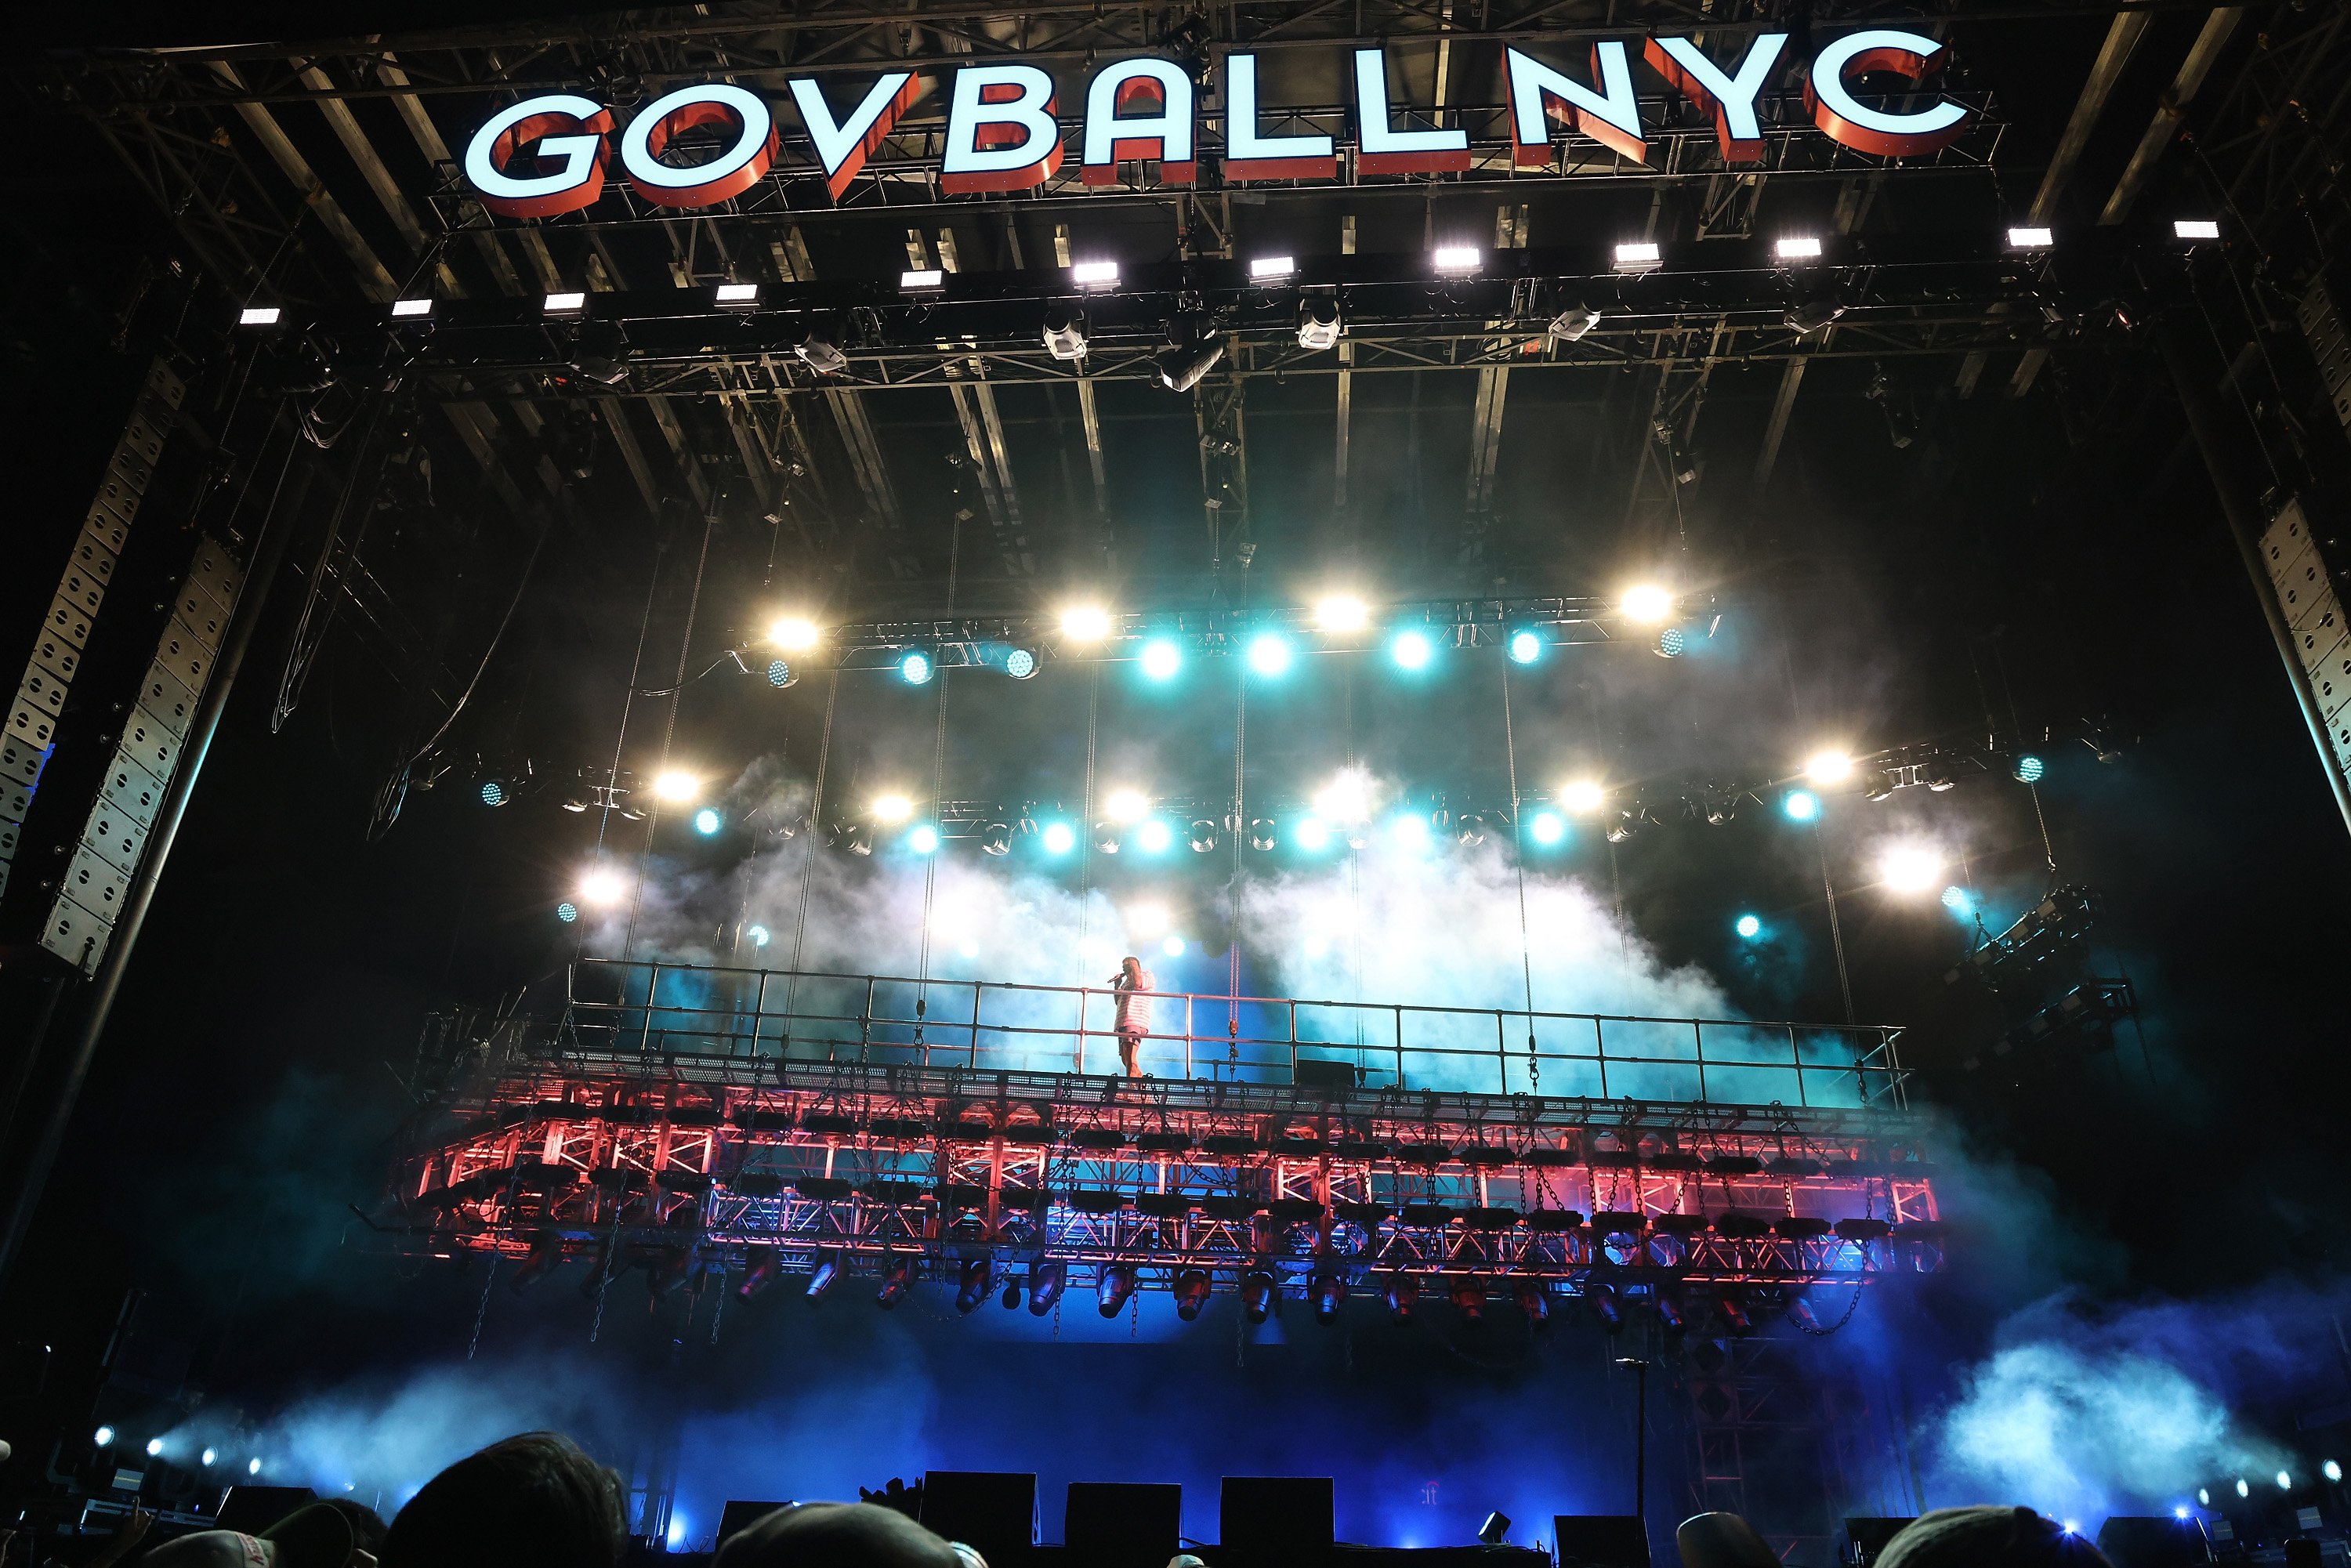 Post Malone performs during the 2021 Governors Ball Music Festival at Citi Field